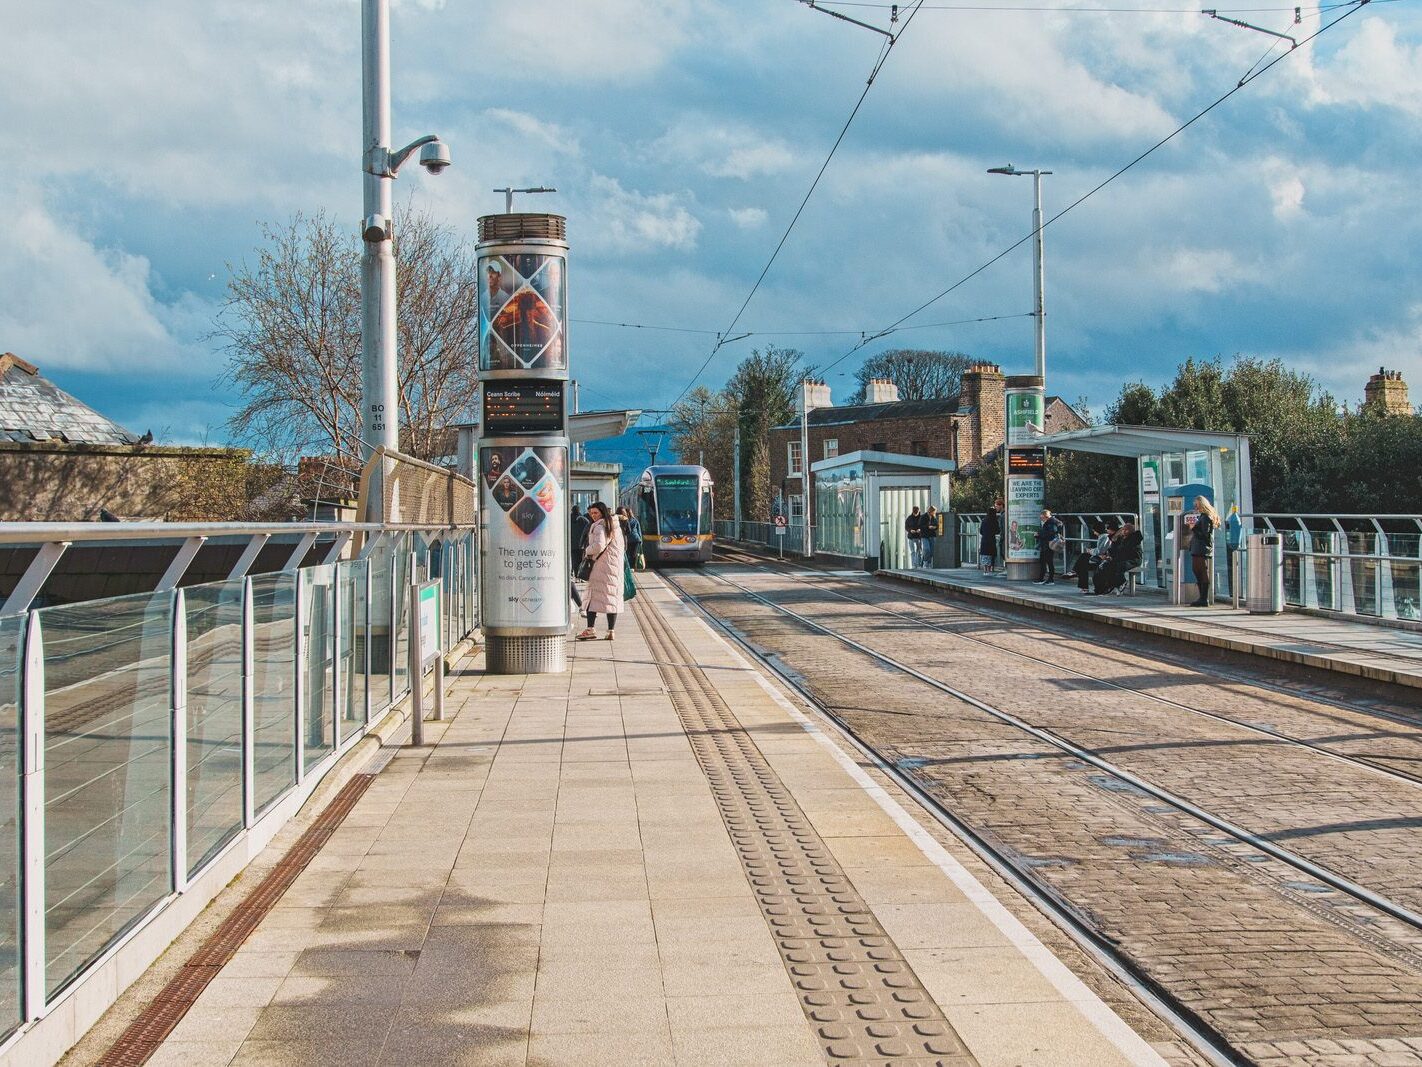 THE RANELAGH LUAS TRAM STOP [AND HOW TO PRONOUNCE RANELAGH]-231203-1